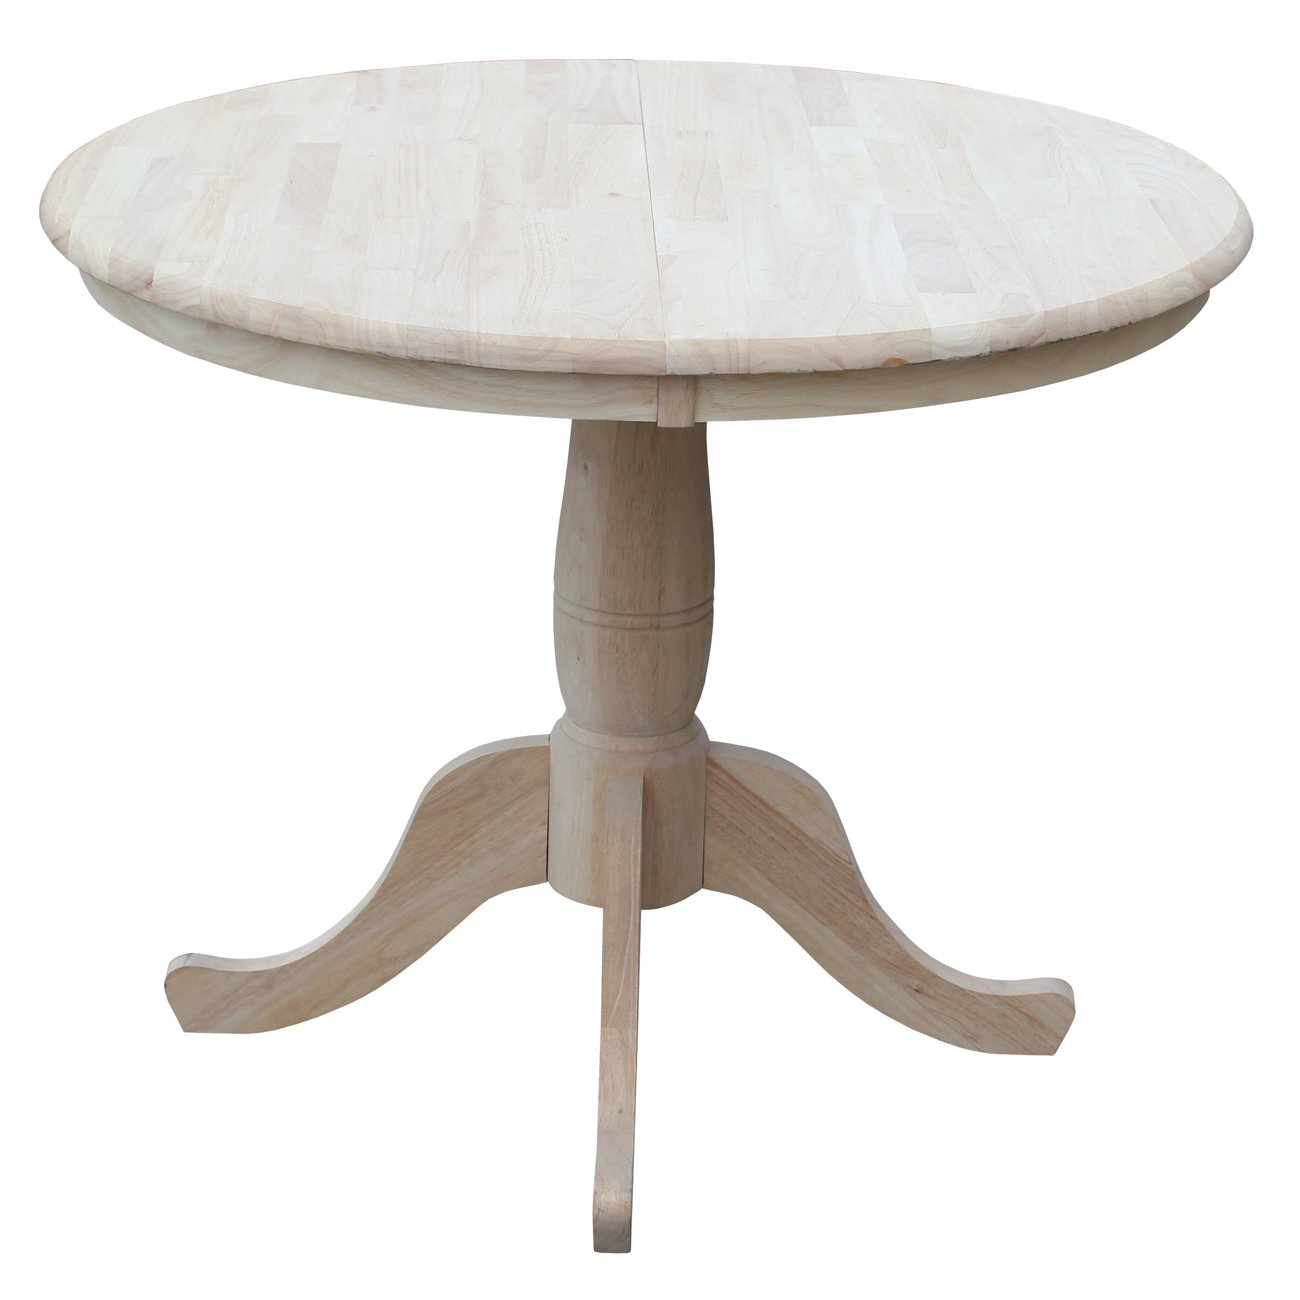 Cute Lark Manoru0026trade; Overbay Round Pedestal 30 Extendable Dining Table oval extending dining table